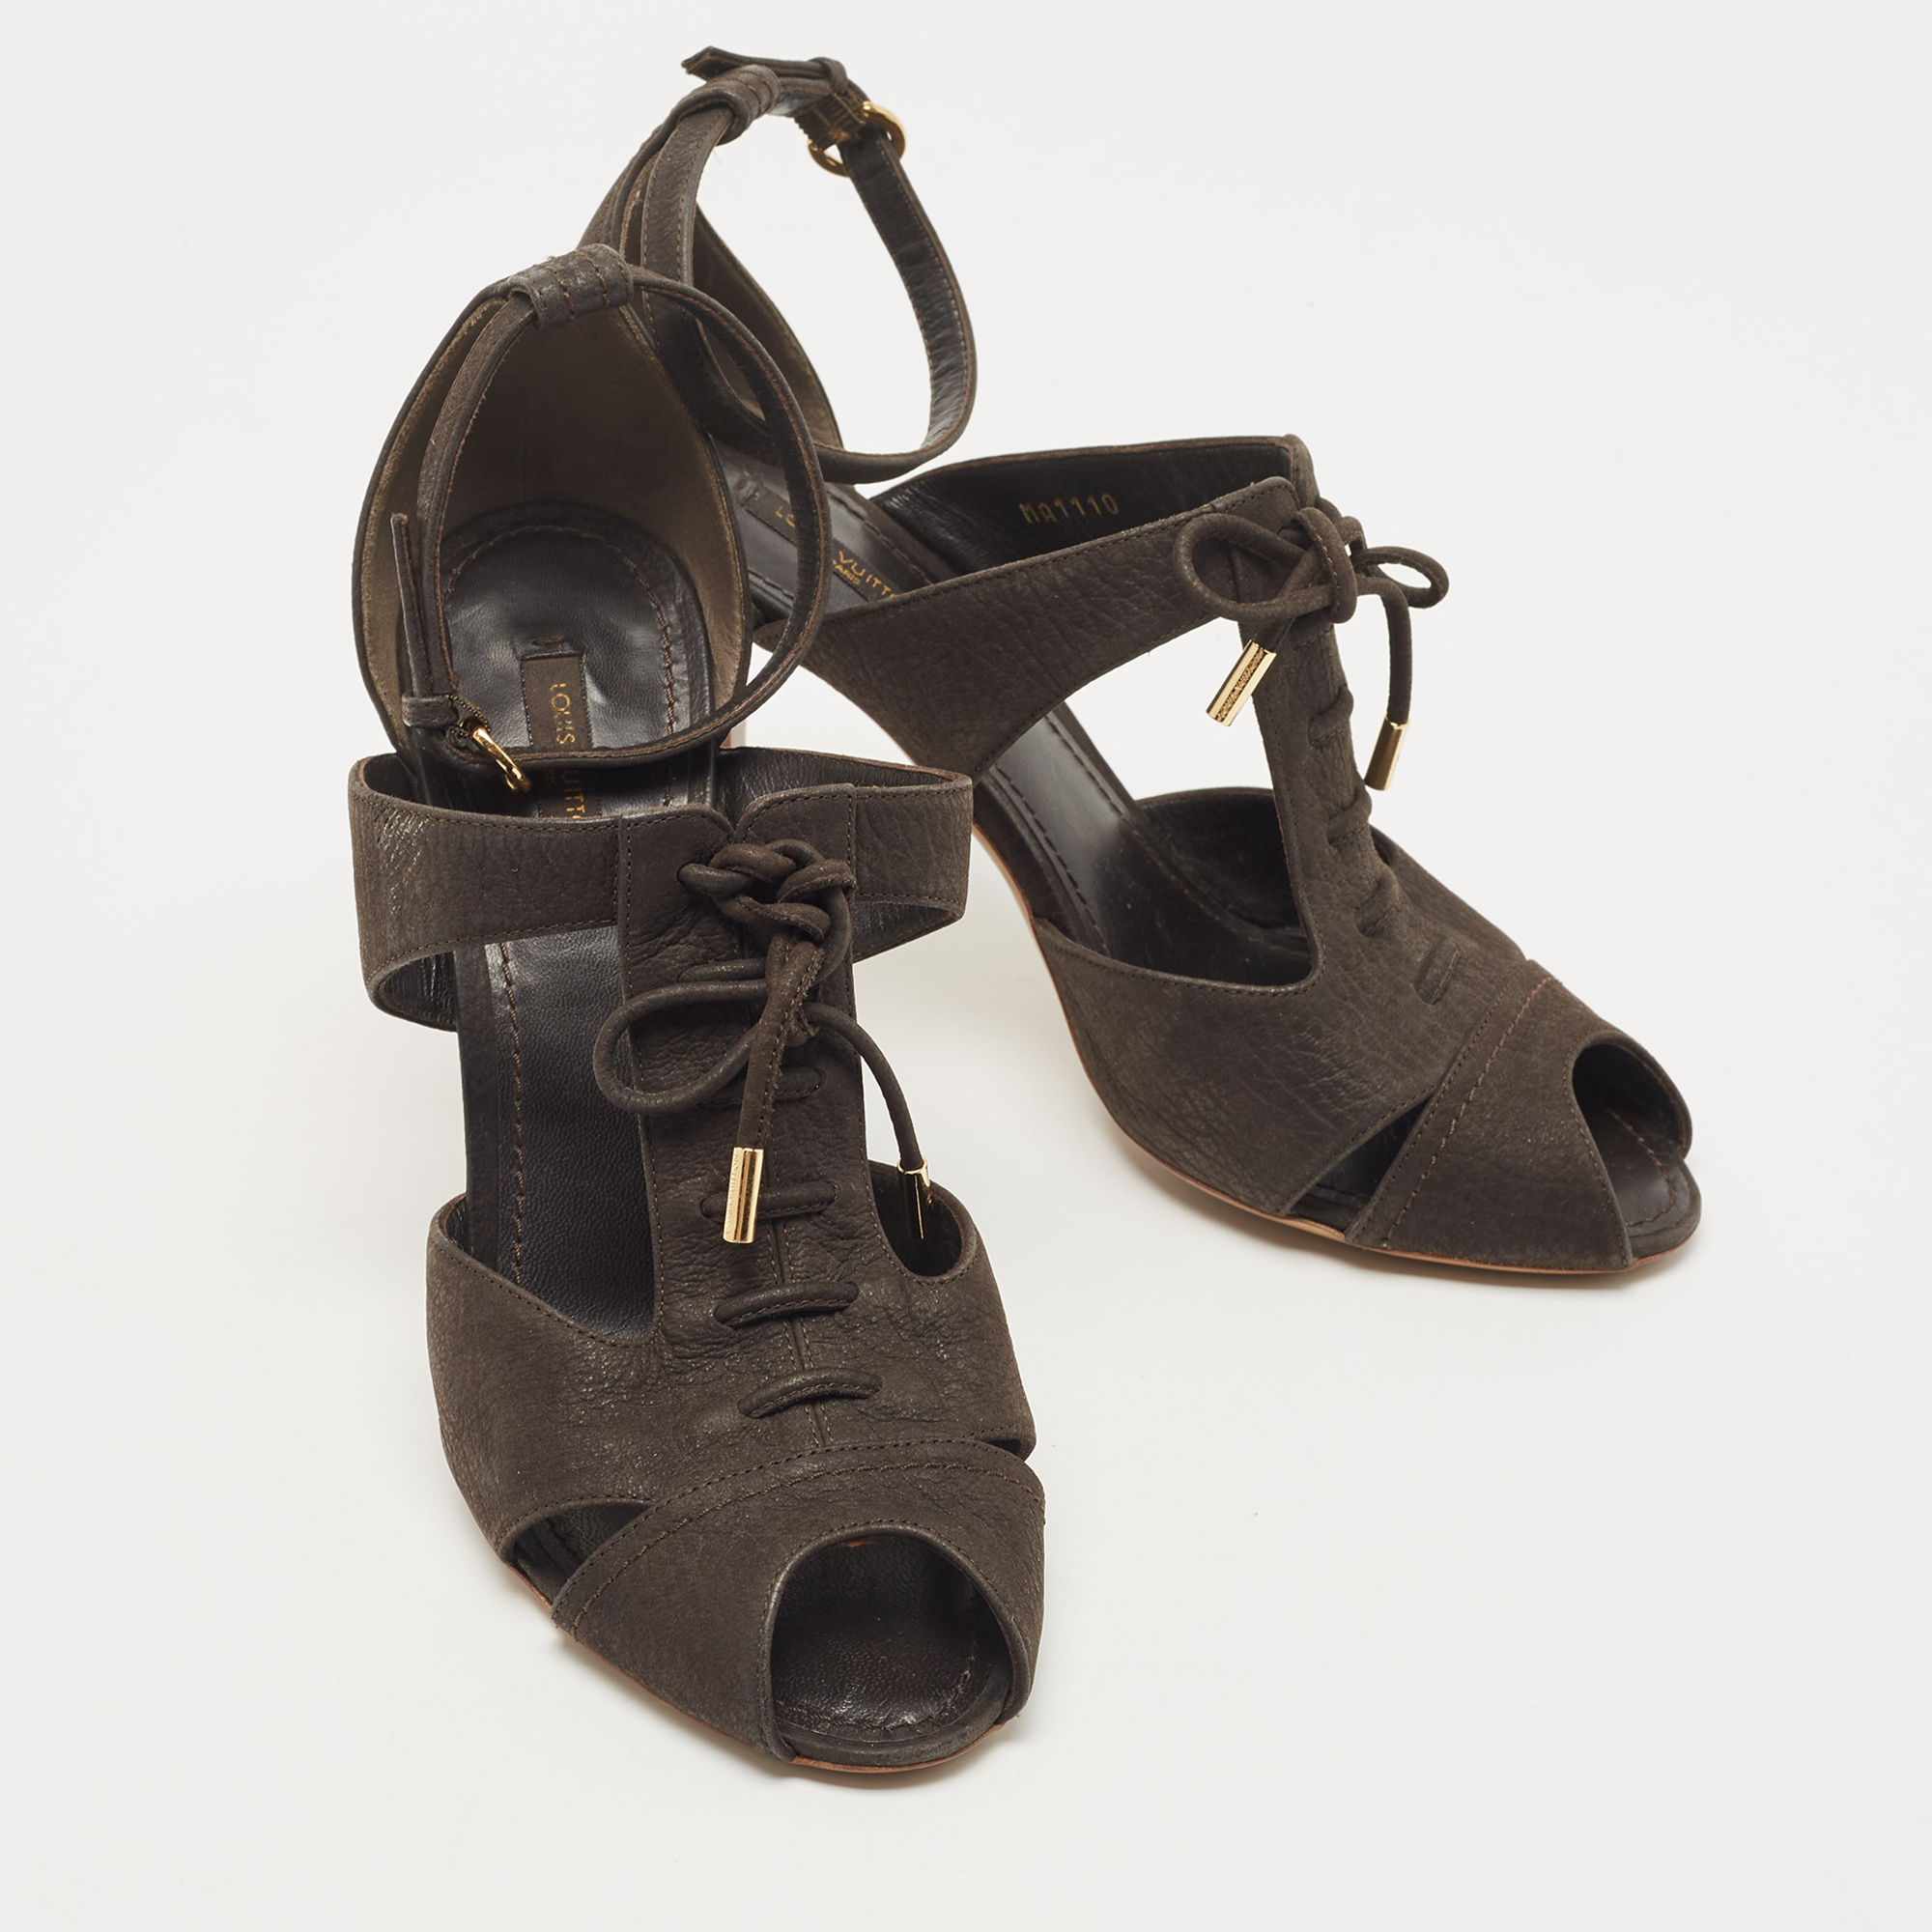 Louis Vuitton Dark Brown Pebbled Leather Corfu Caged Ankle Strap Sandals Size 40